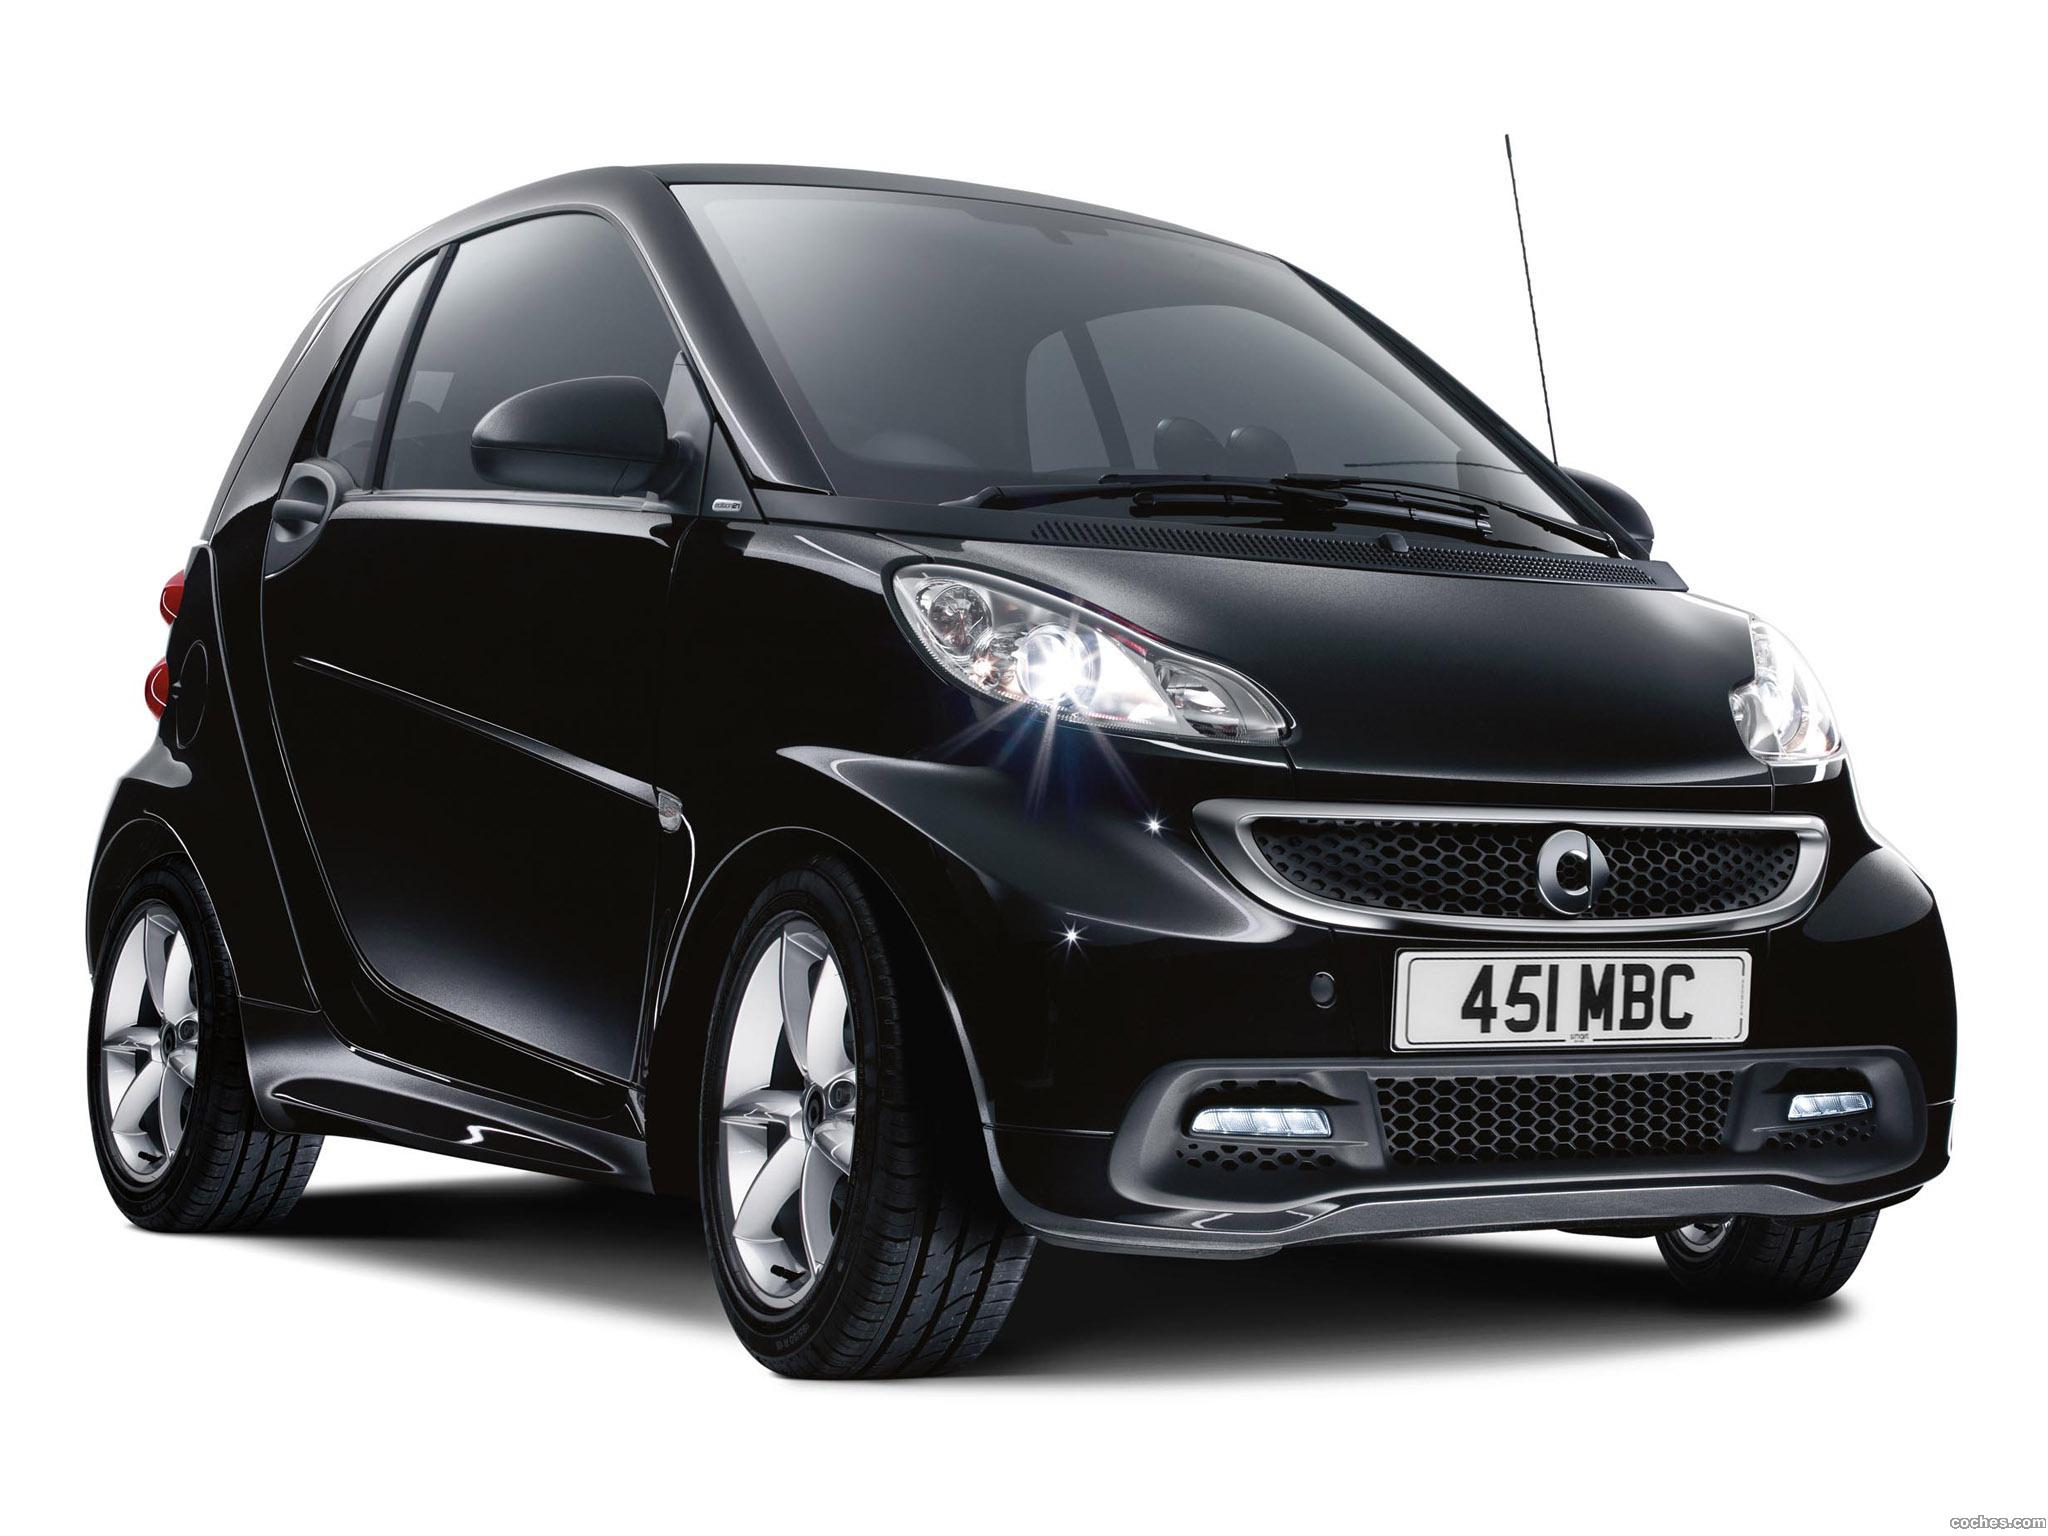 smart_fortwo-edition21-uk-2013_r2